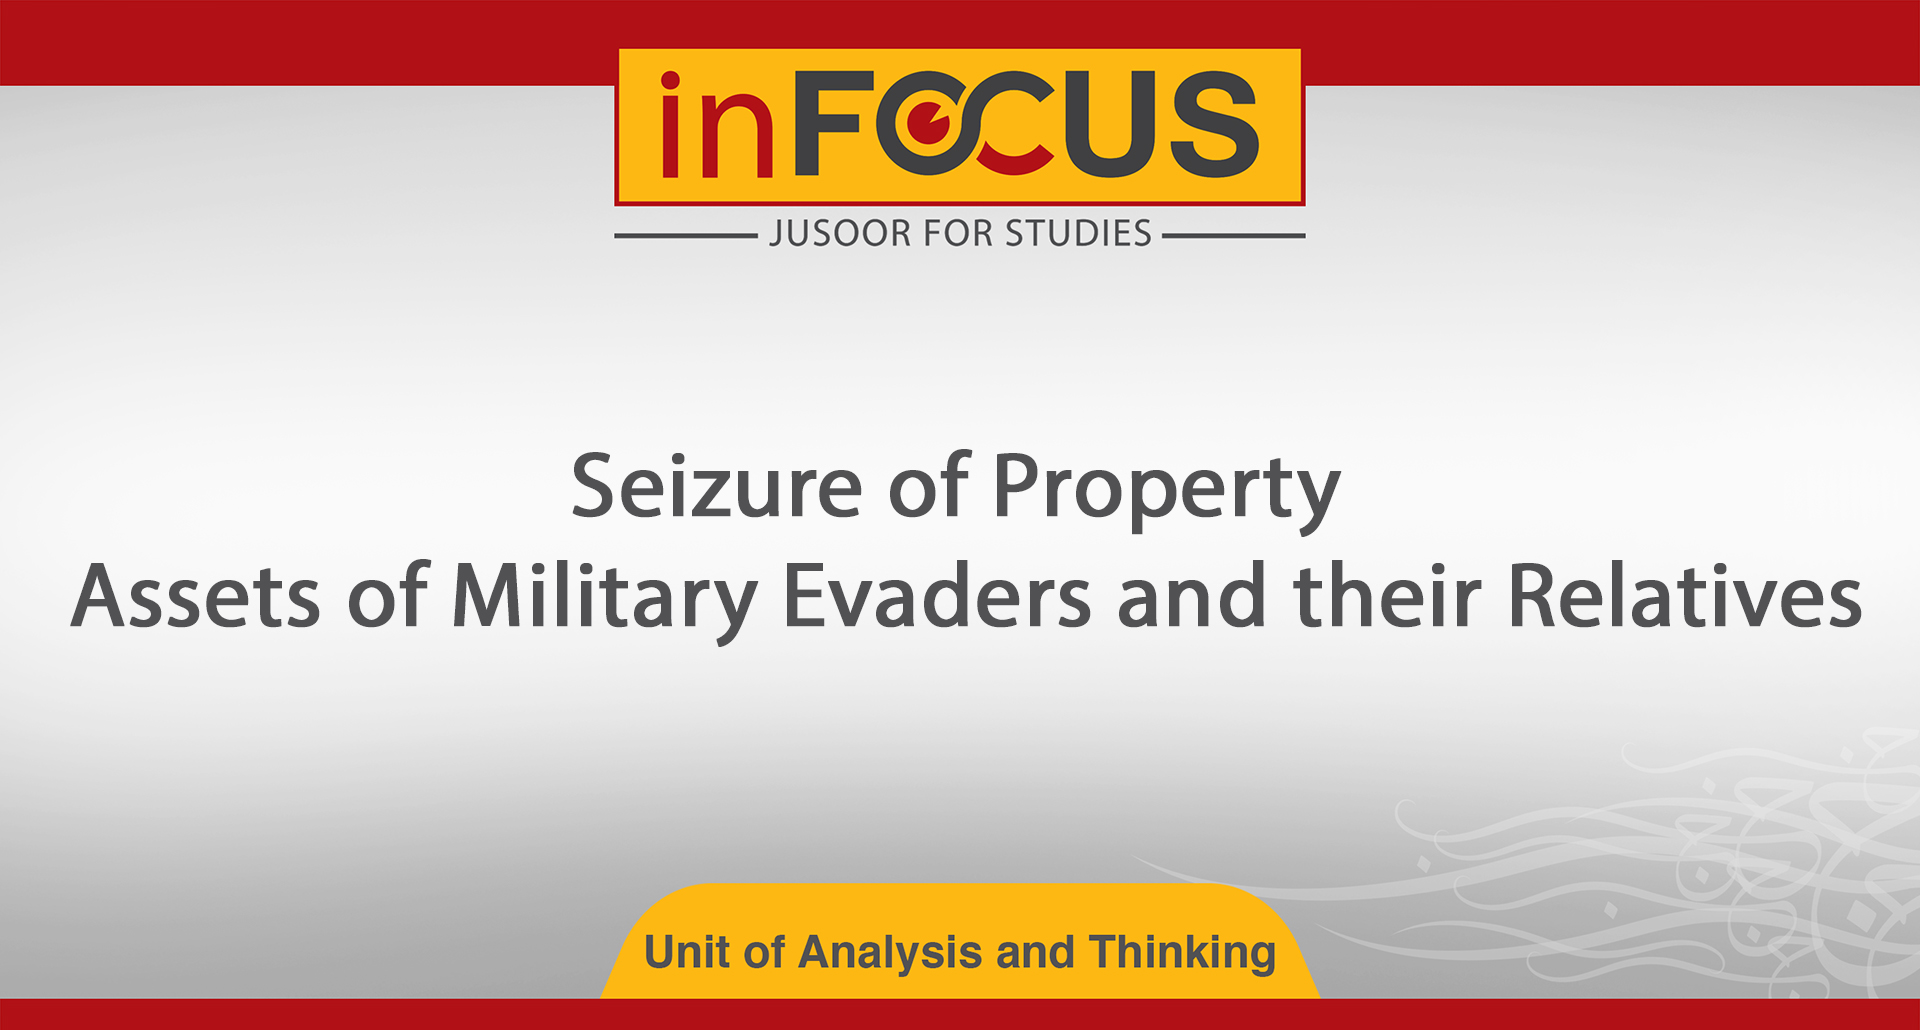 Seizure of Property, Assets of Military Evaders and their Relatives